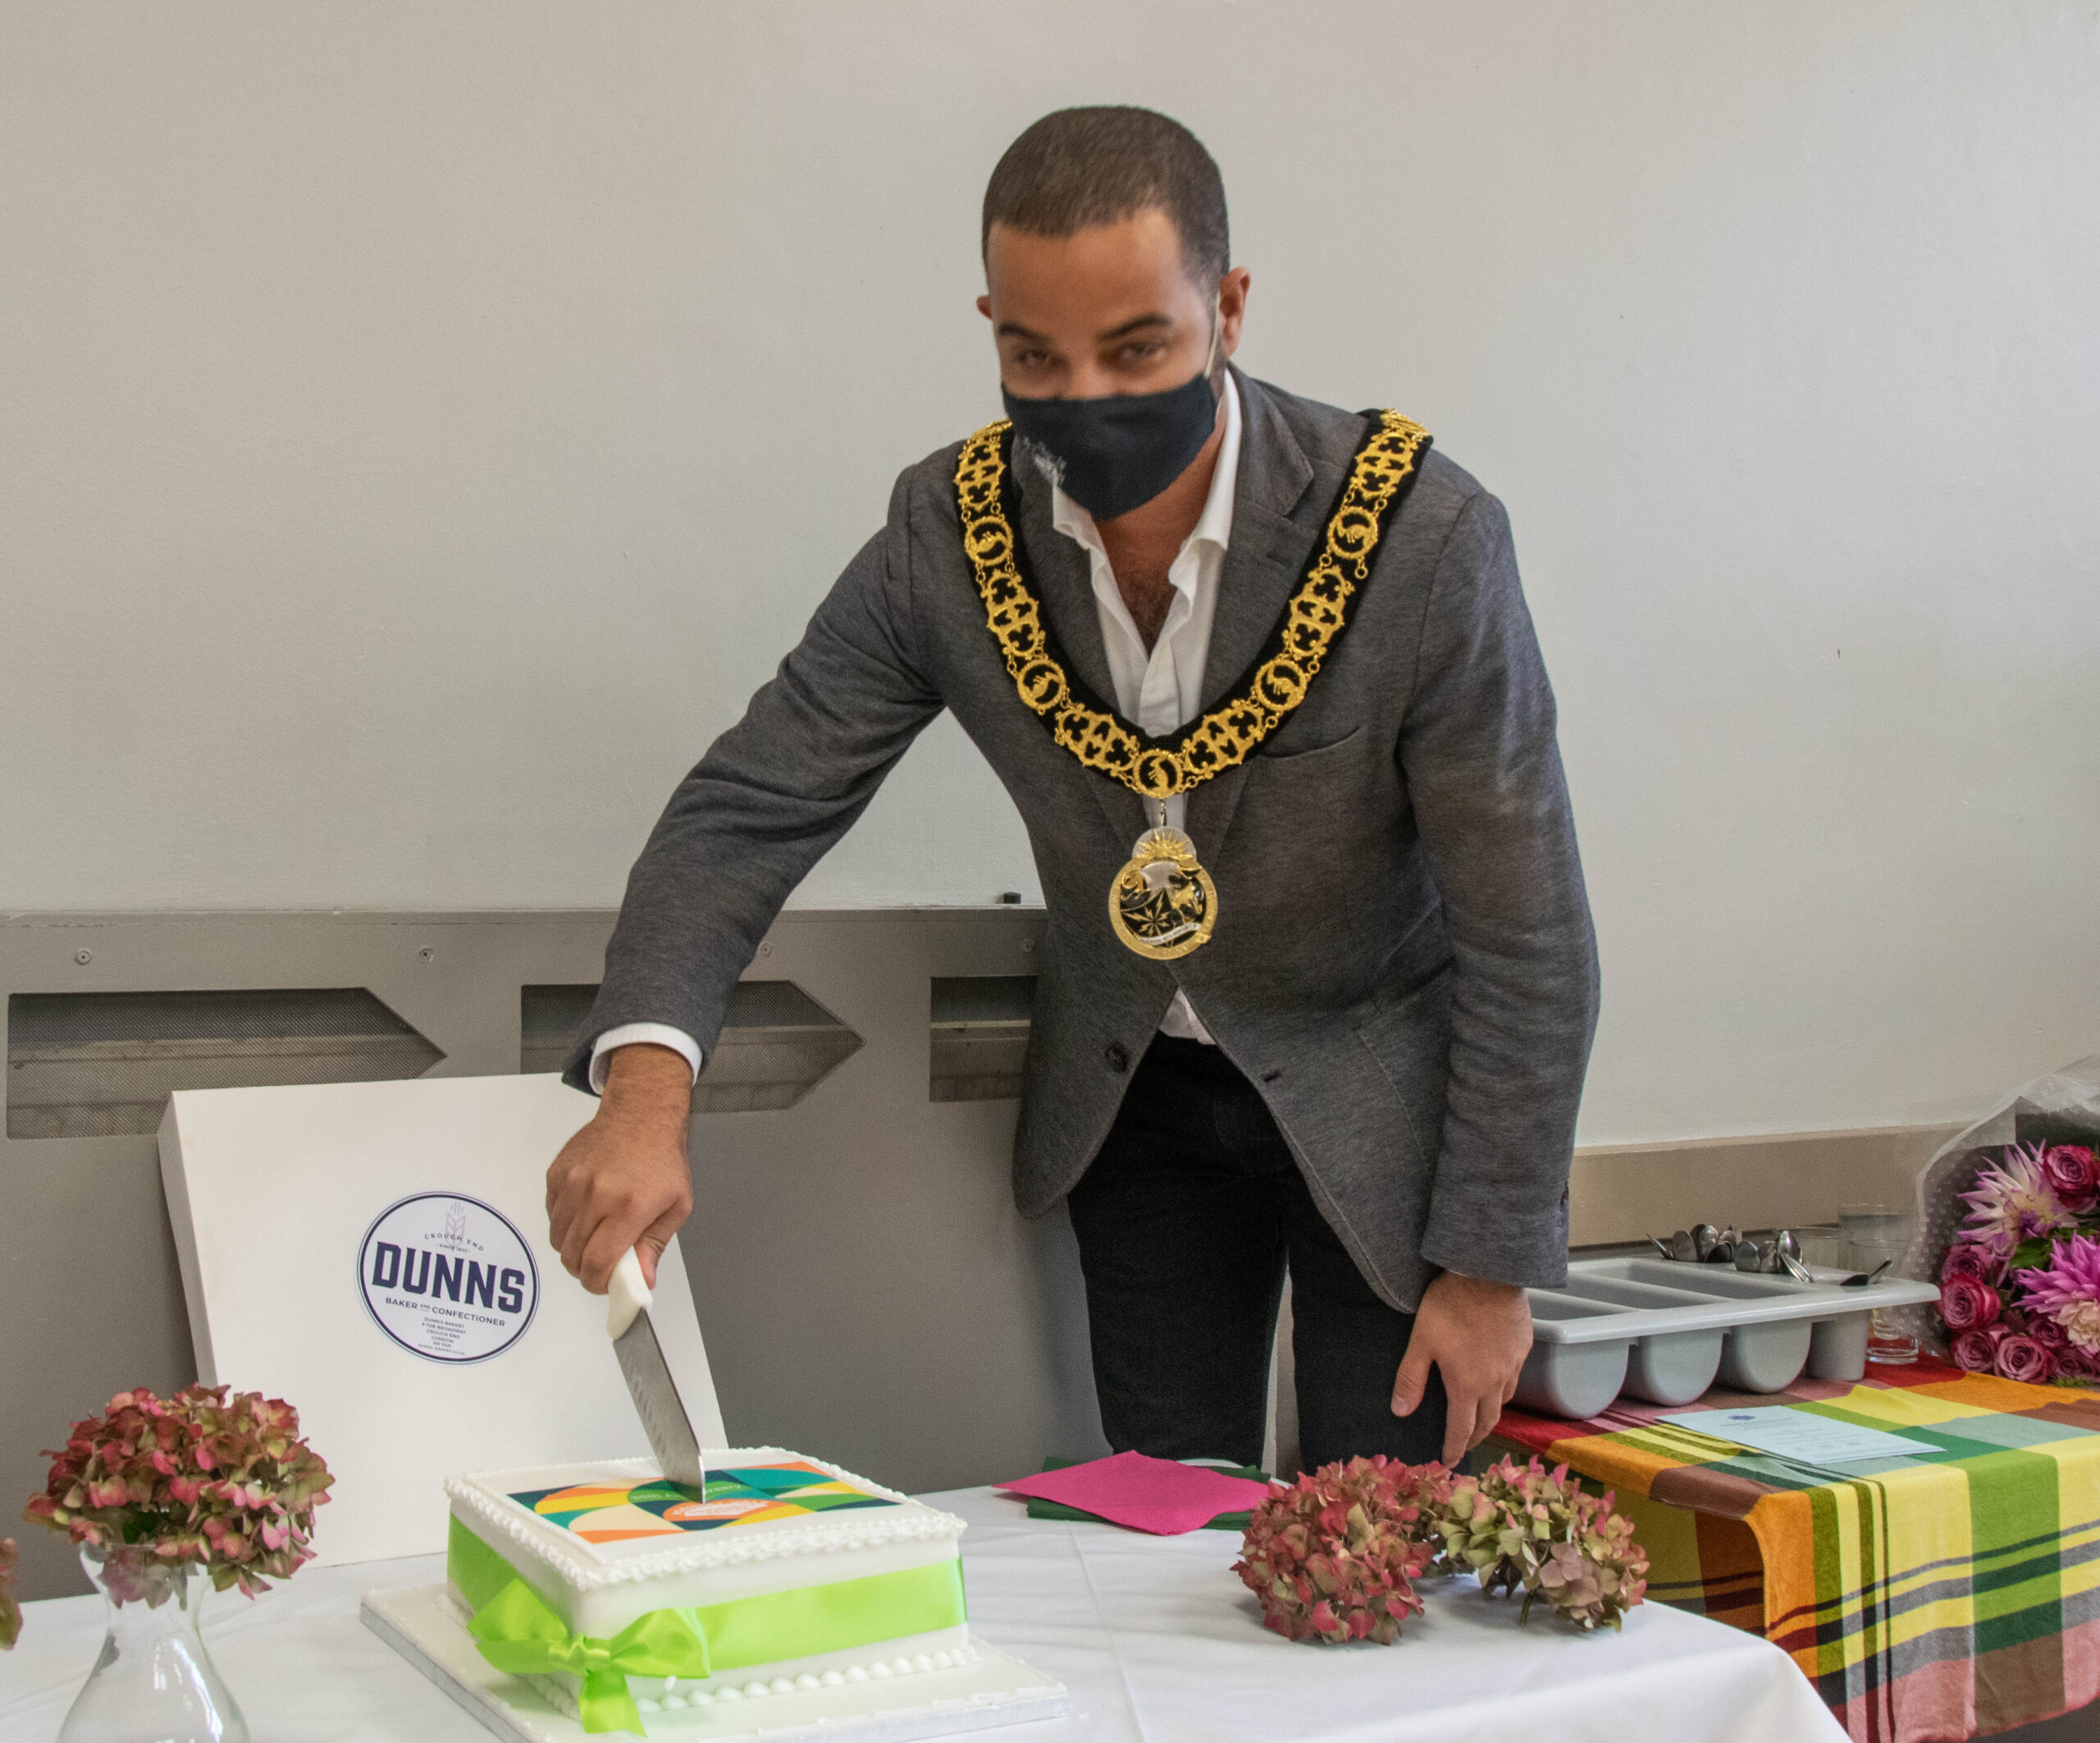 Attendees included the Mayor of Haringey, Councillor Adam Jogee, who grew up near the centre